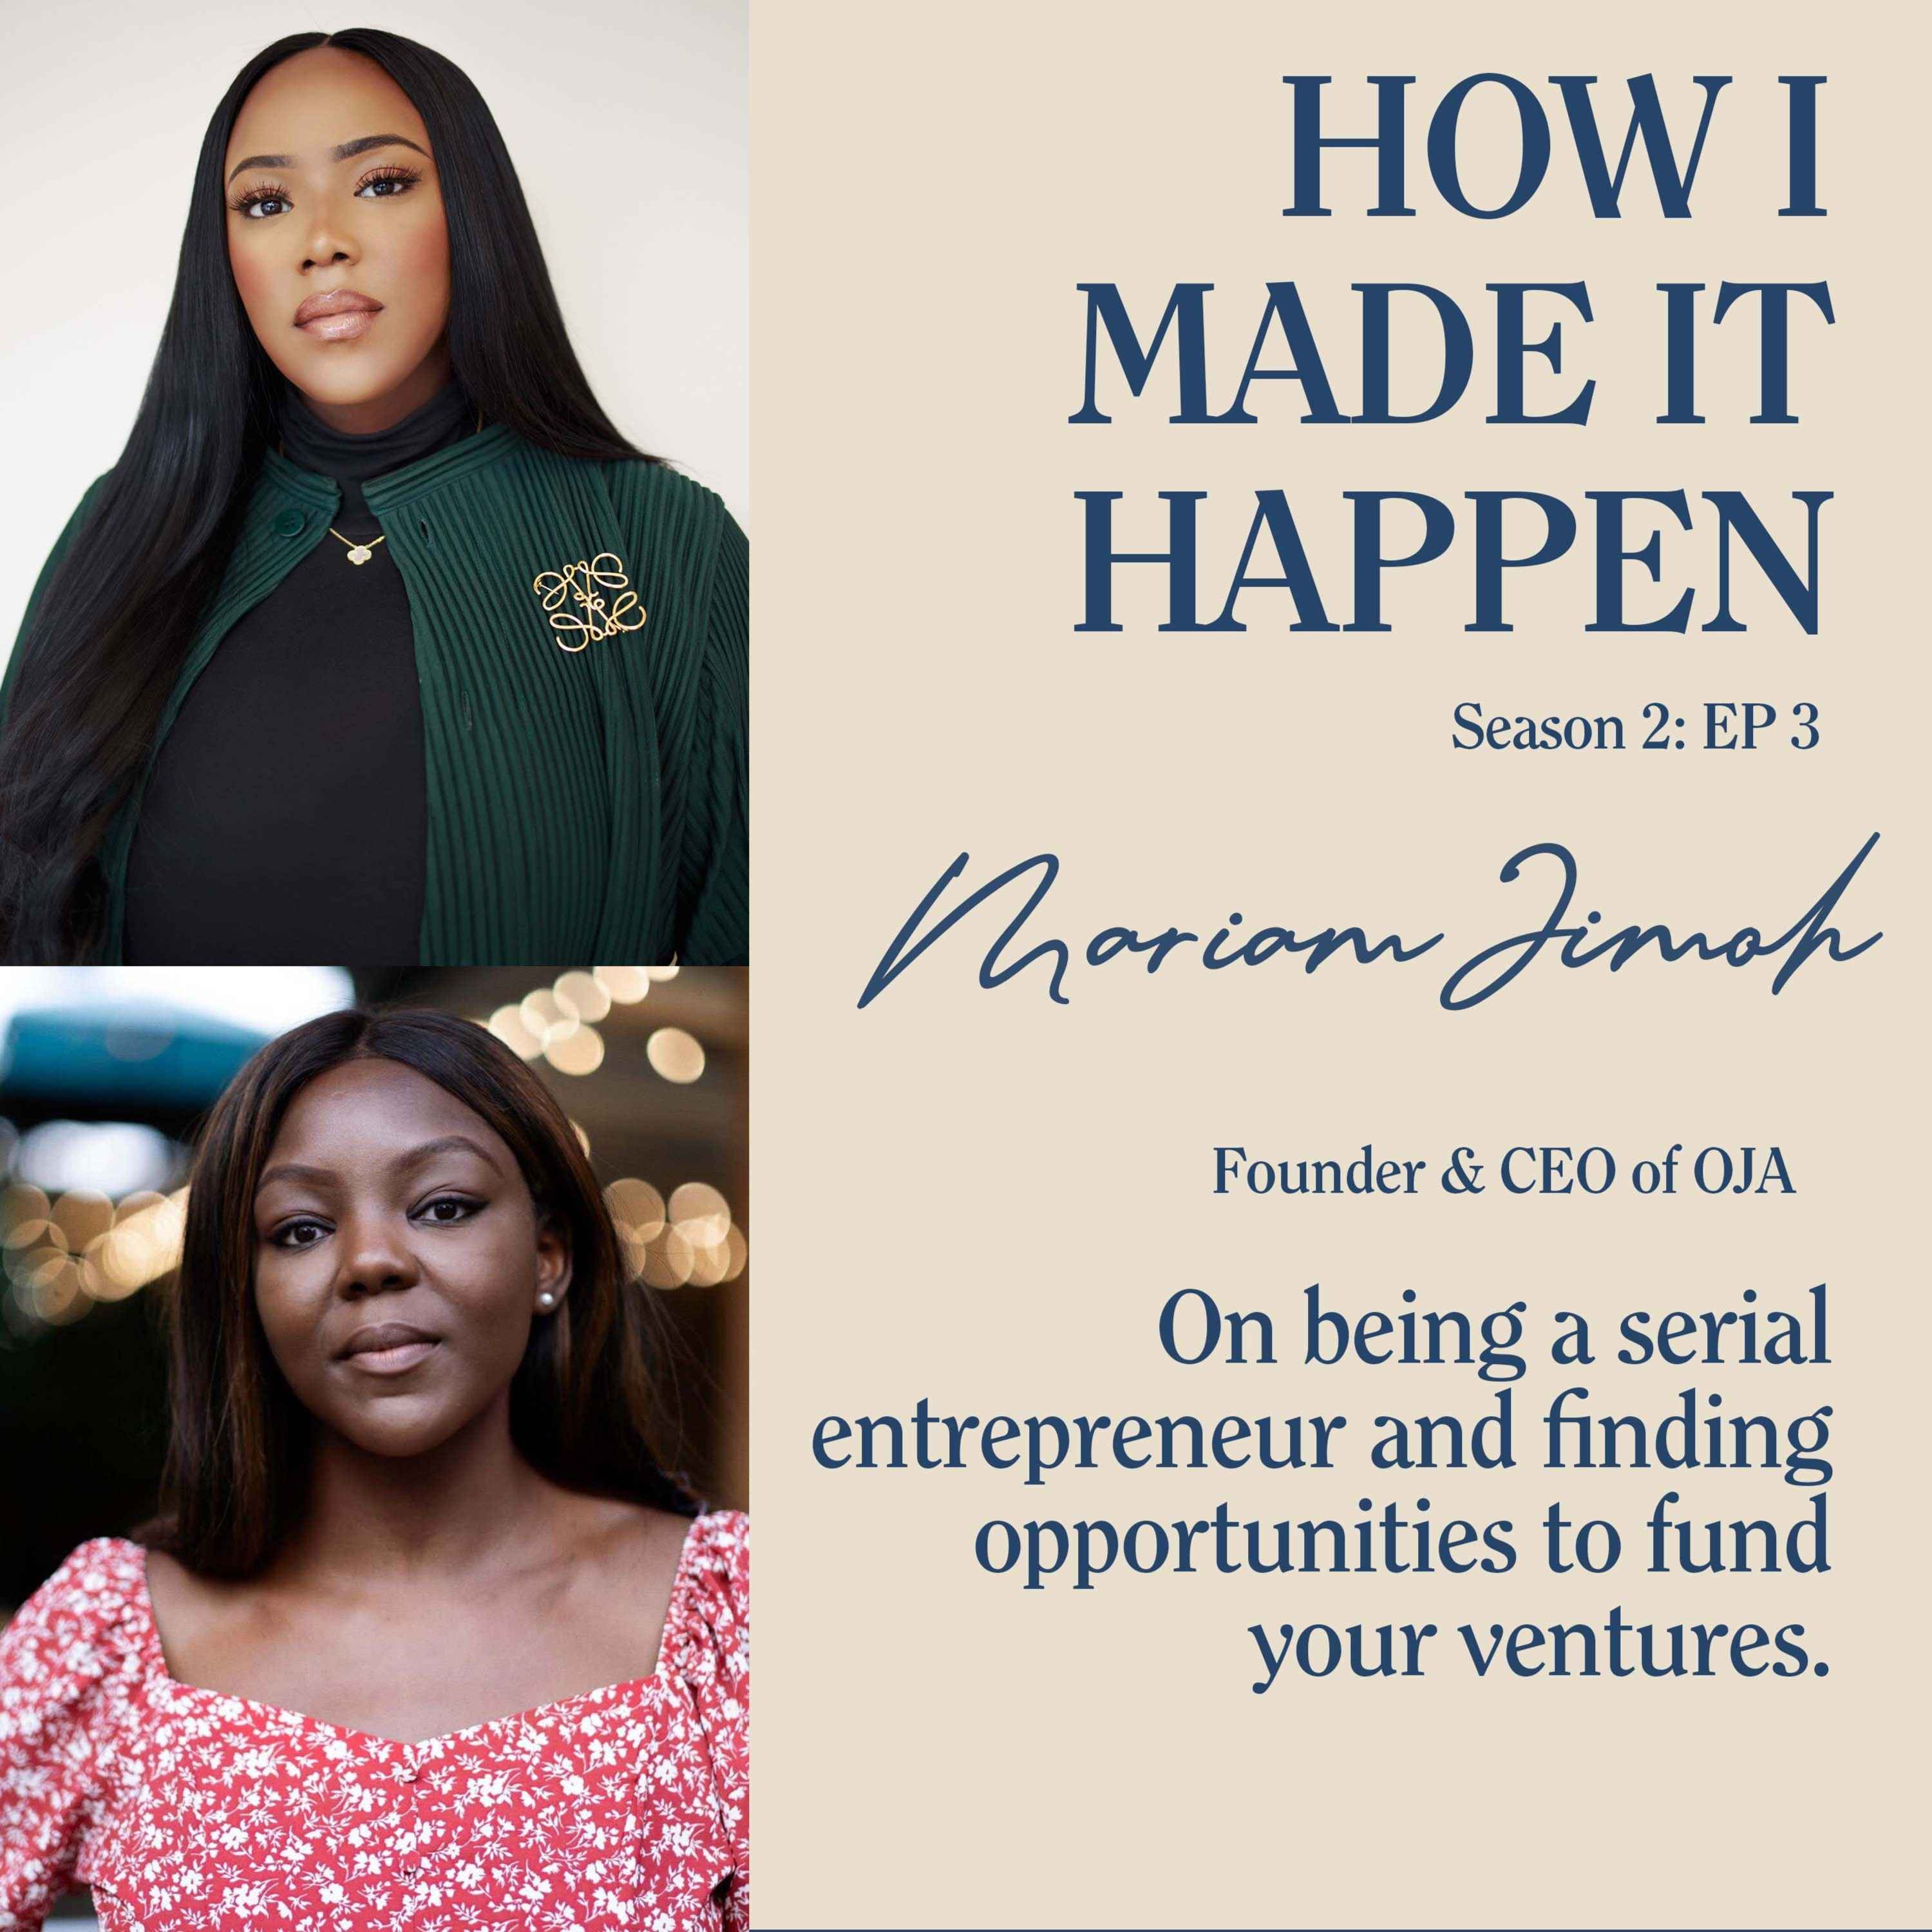 Mariam Jimoh, founder of OJA: on being a serial entrepreneur and finding opportunities to fund your ventures